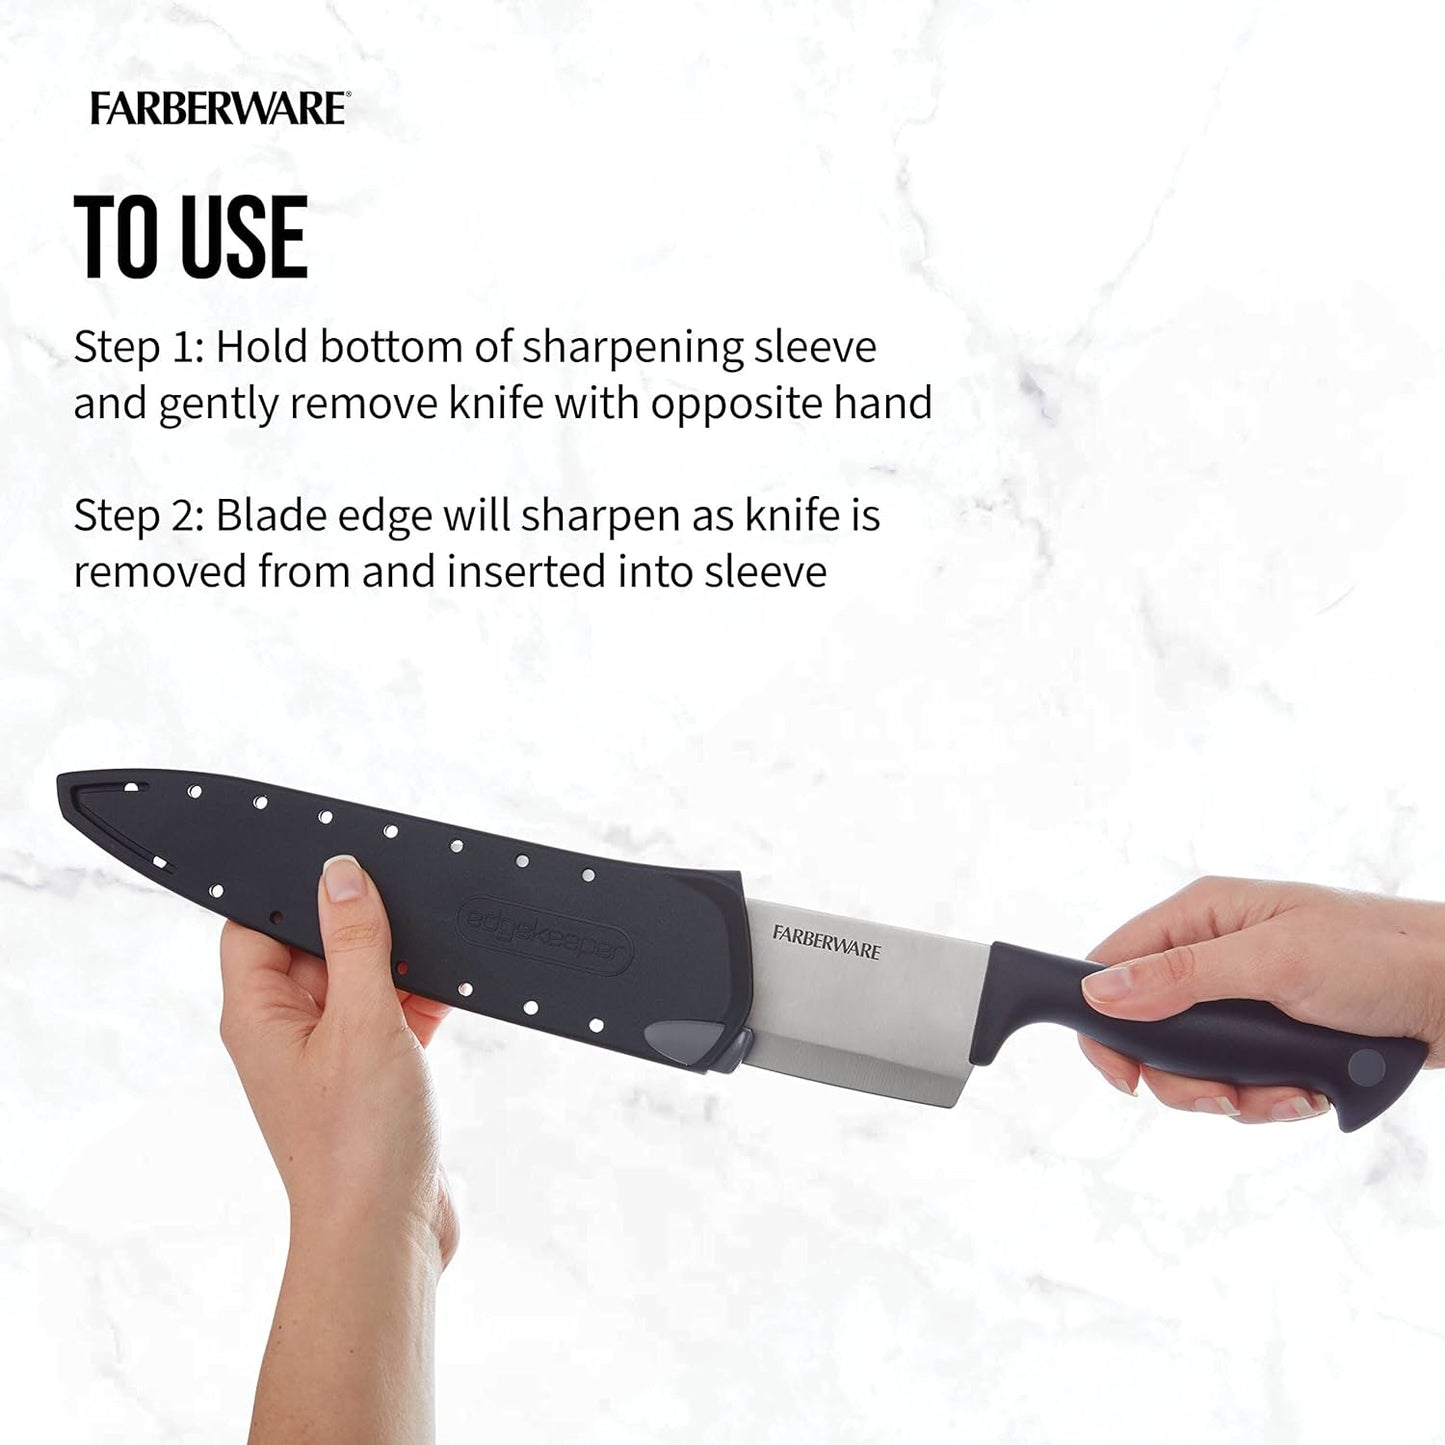 Edgekeeper 8-Inch Chef Knife with Self-Sharpening Blade Cover, High Carbon-Stainless Steel Kitchen Knife with Ergonomic Handle, Razor-Sharp Knife, Black